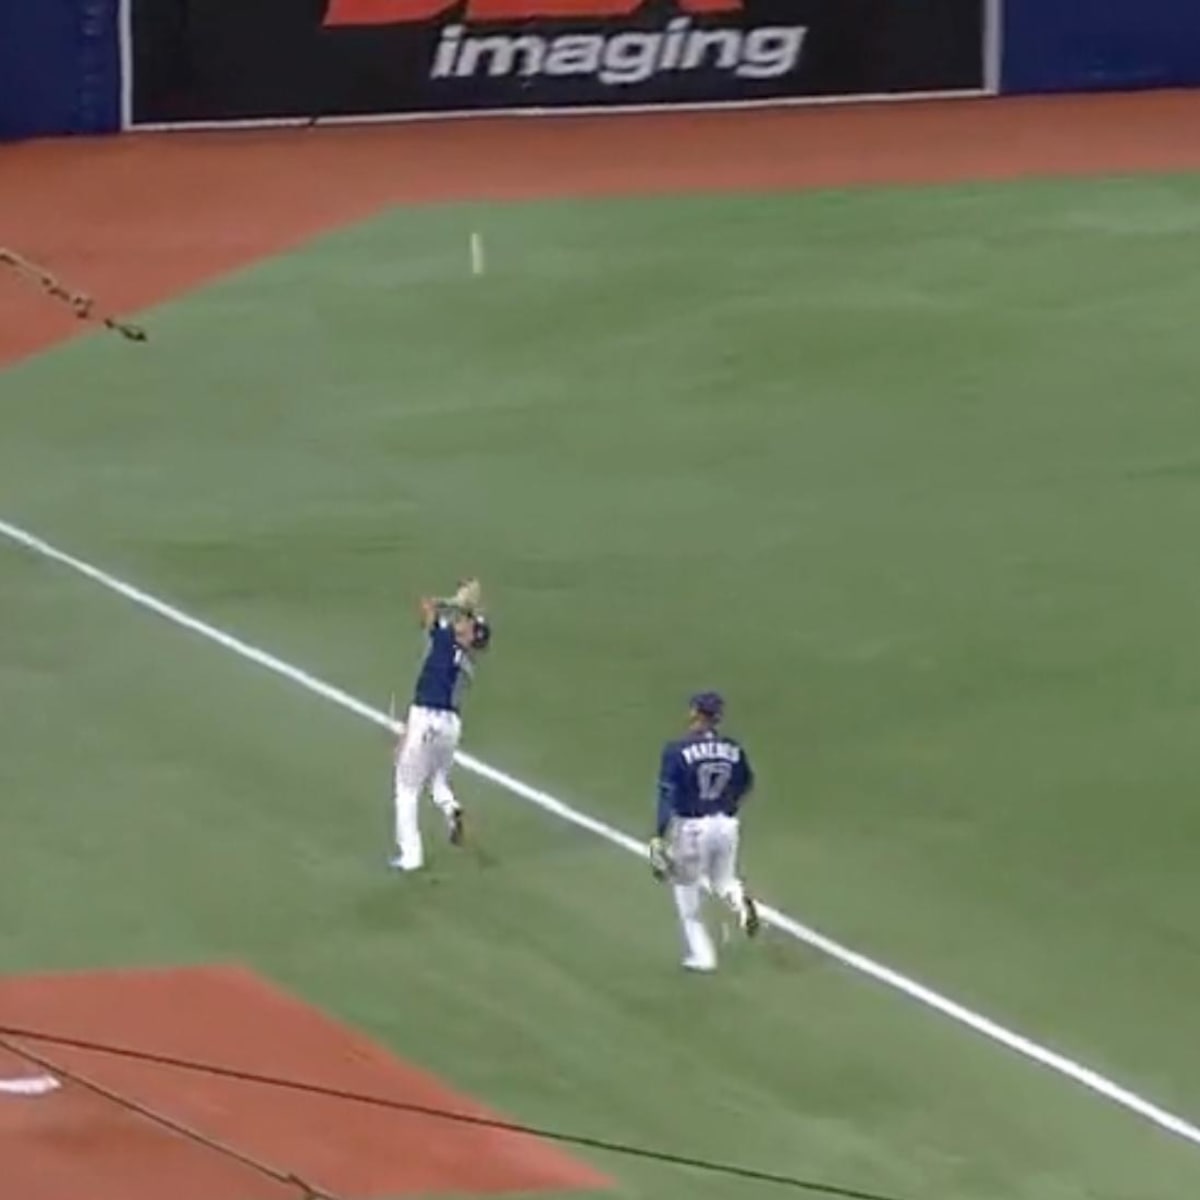 WATCH: Wander Franco Makes Incredible Catch You Have To See To Believe